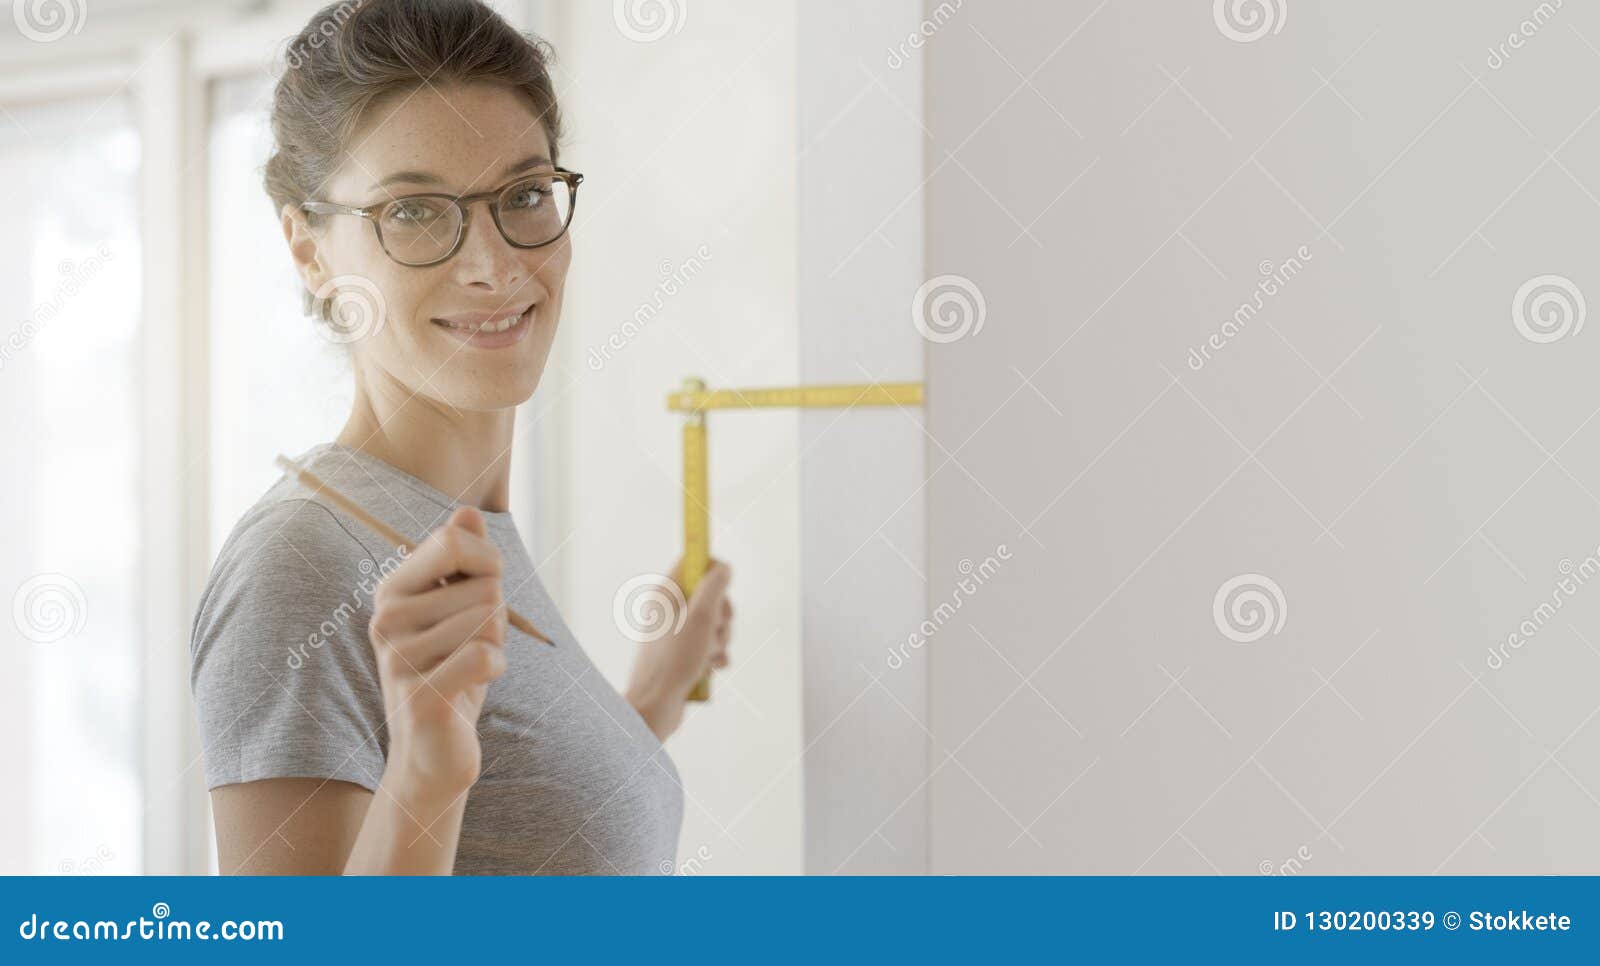 smiling woman doing a home makeover and measuring with a ruler